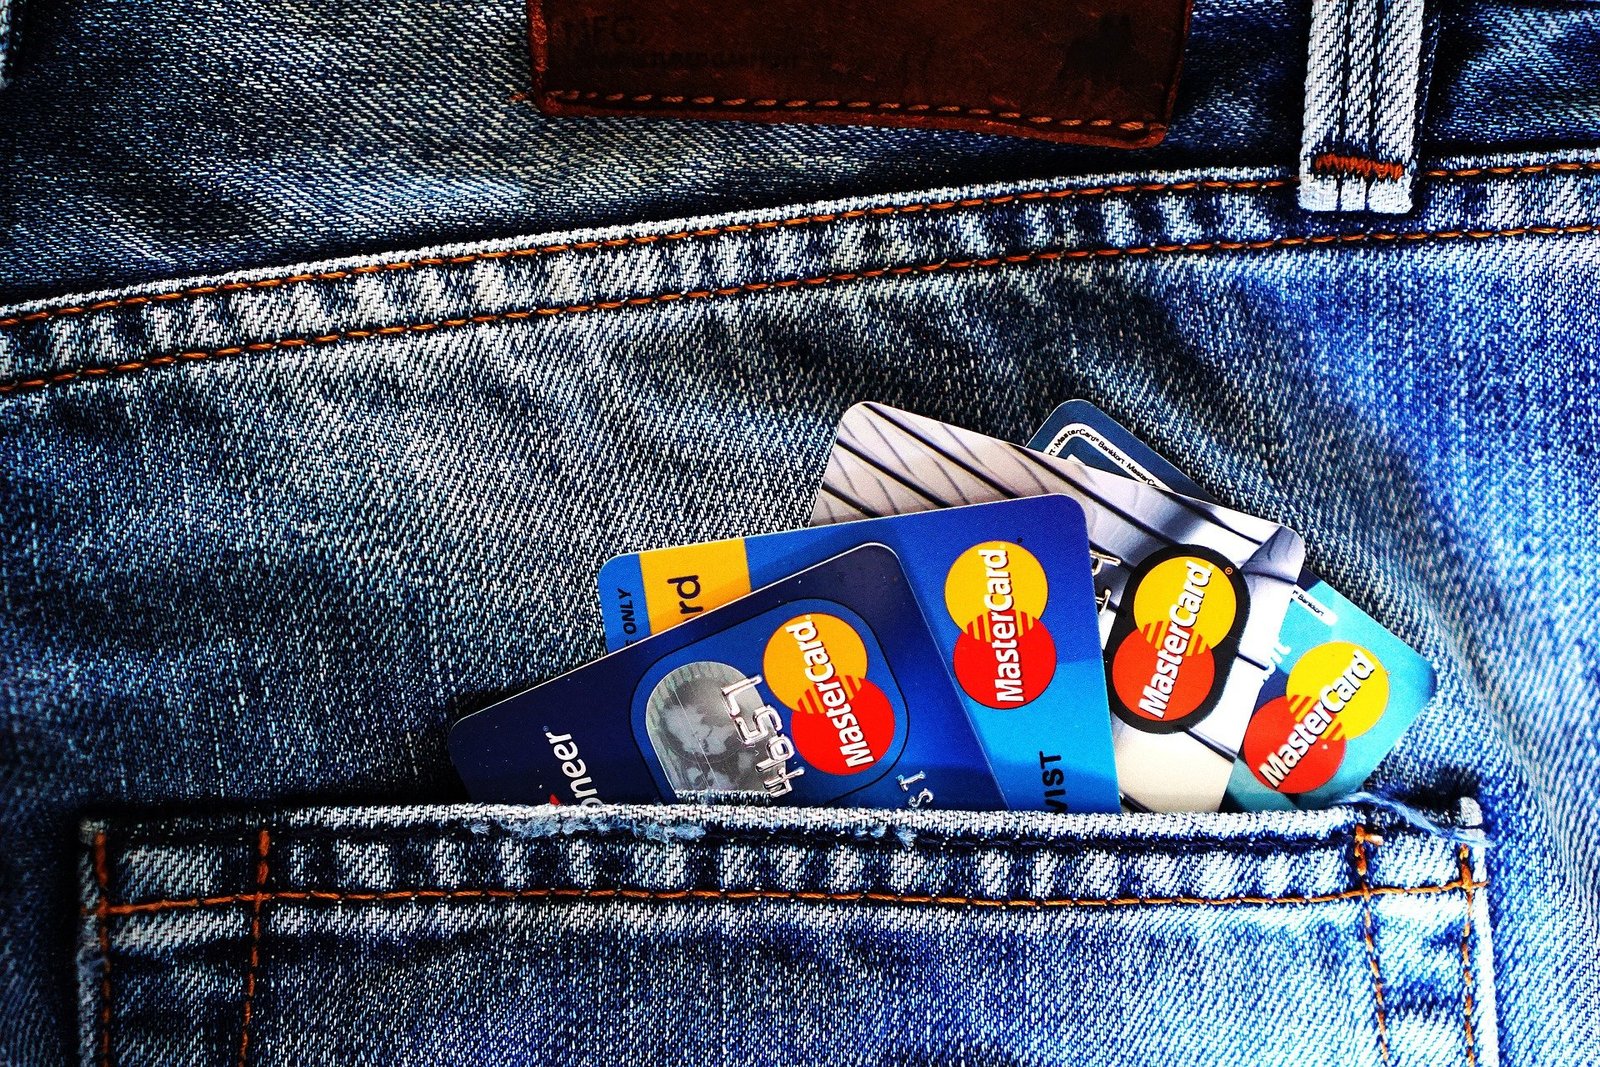 The Past and Future of Payment Cards